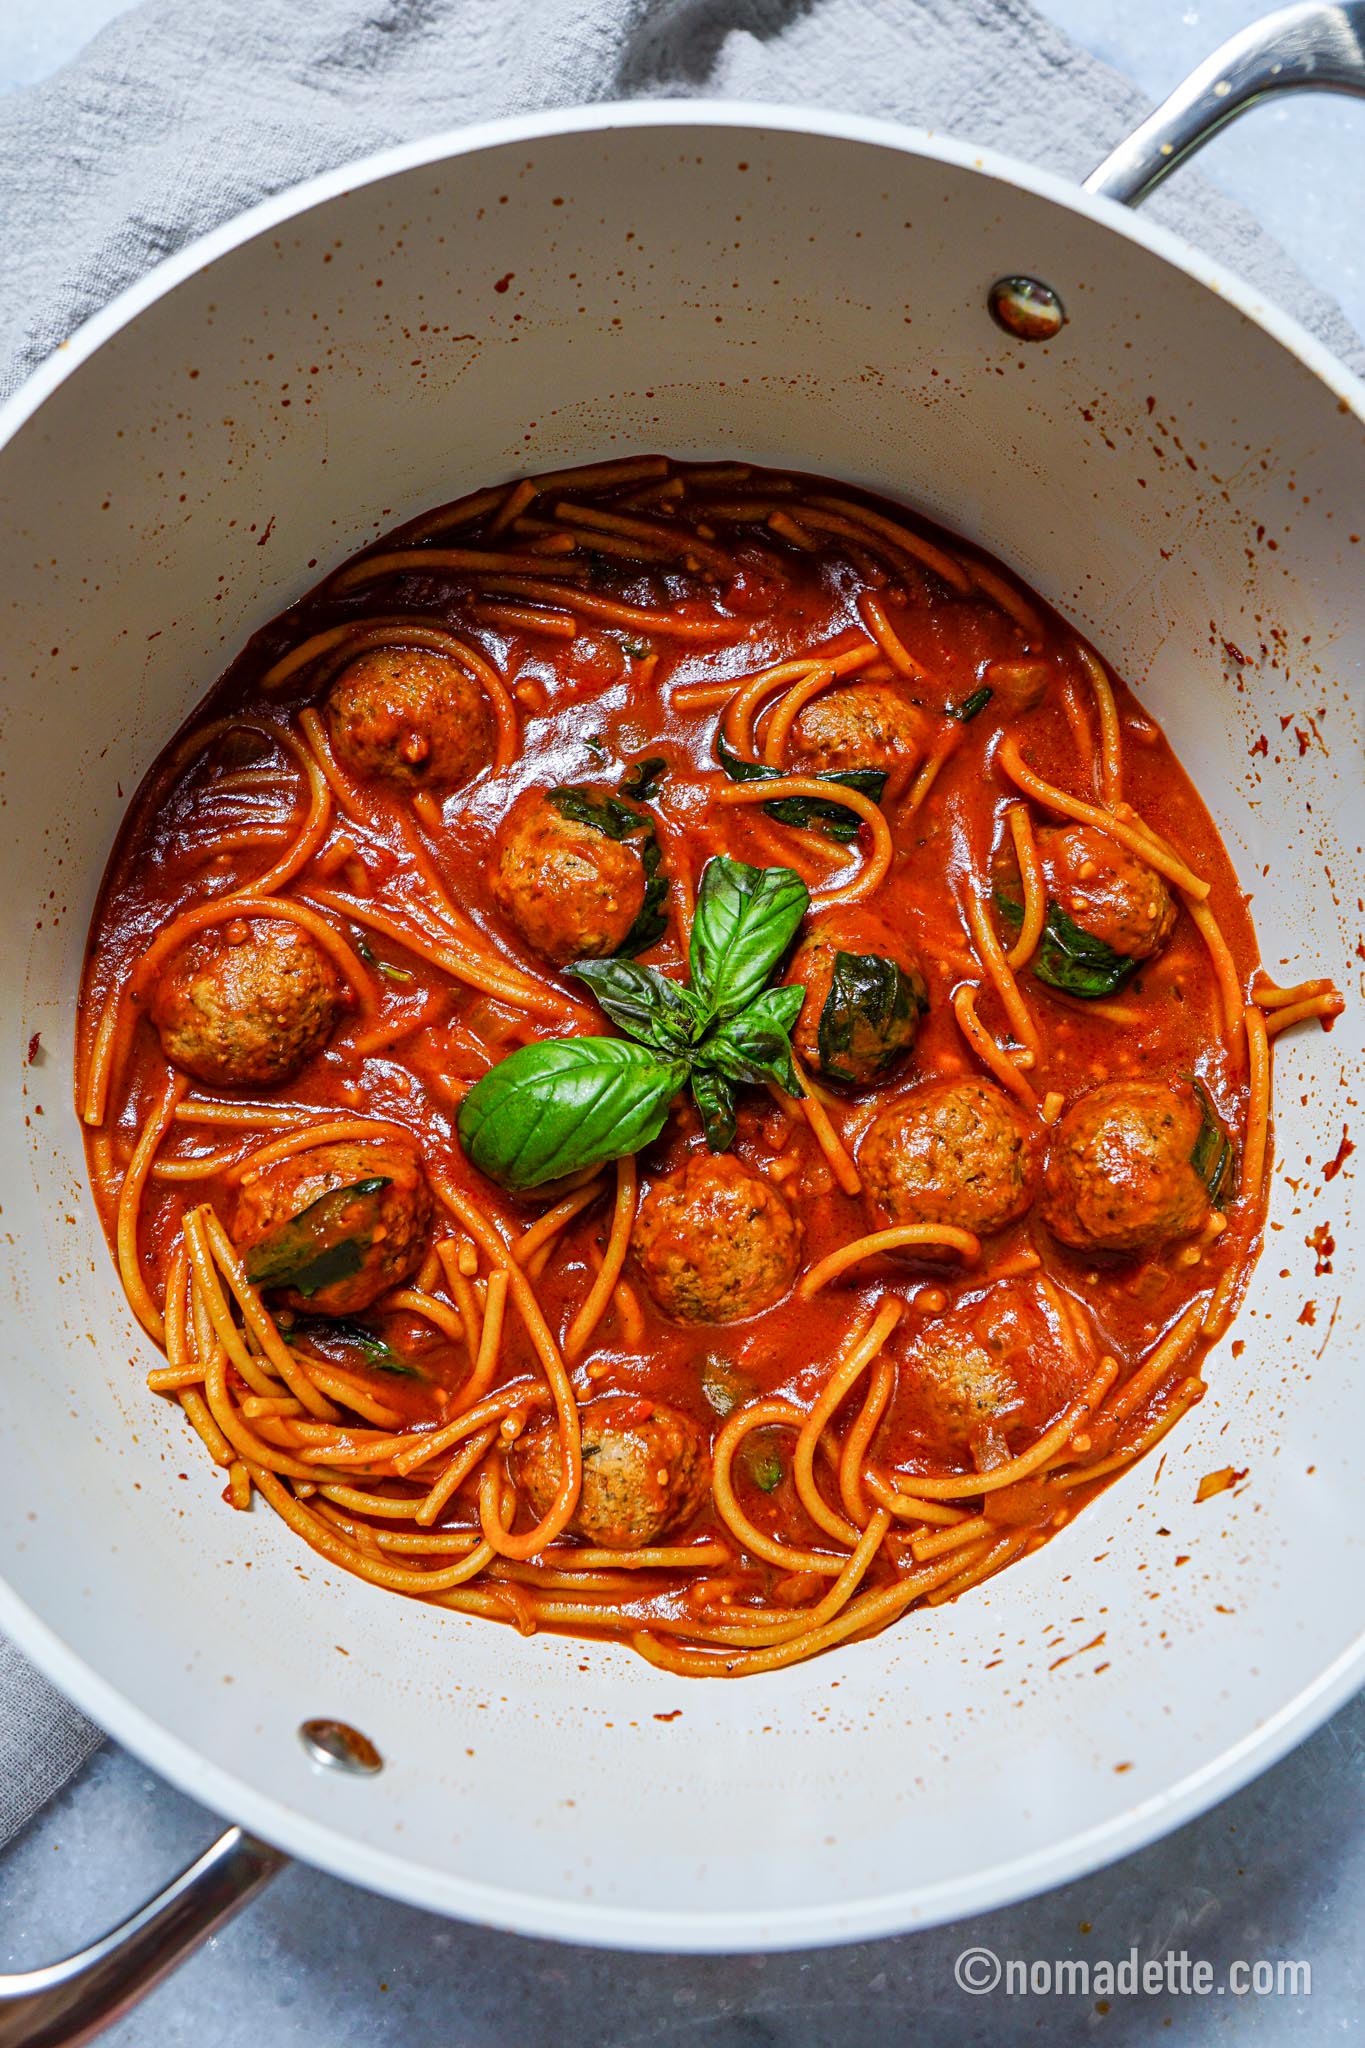 Instant Pot Spaghetti And Meatballs: A Comprehensive Guide To Making This Classic Dish